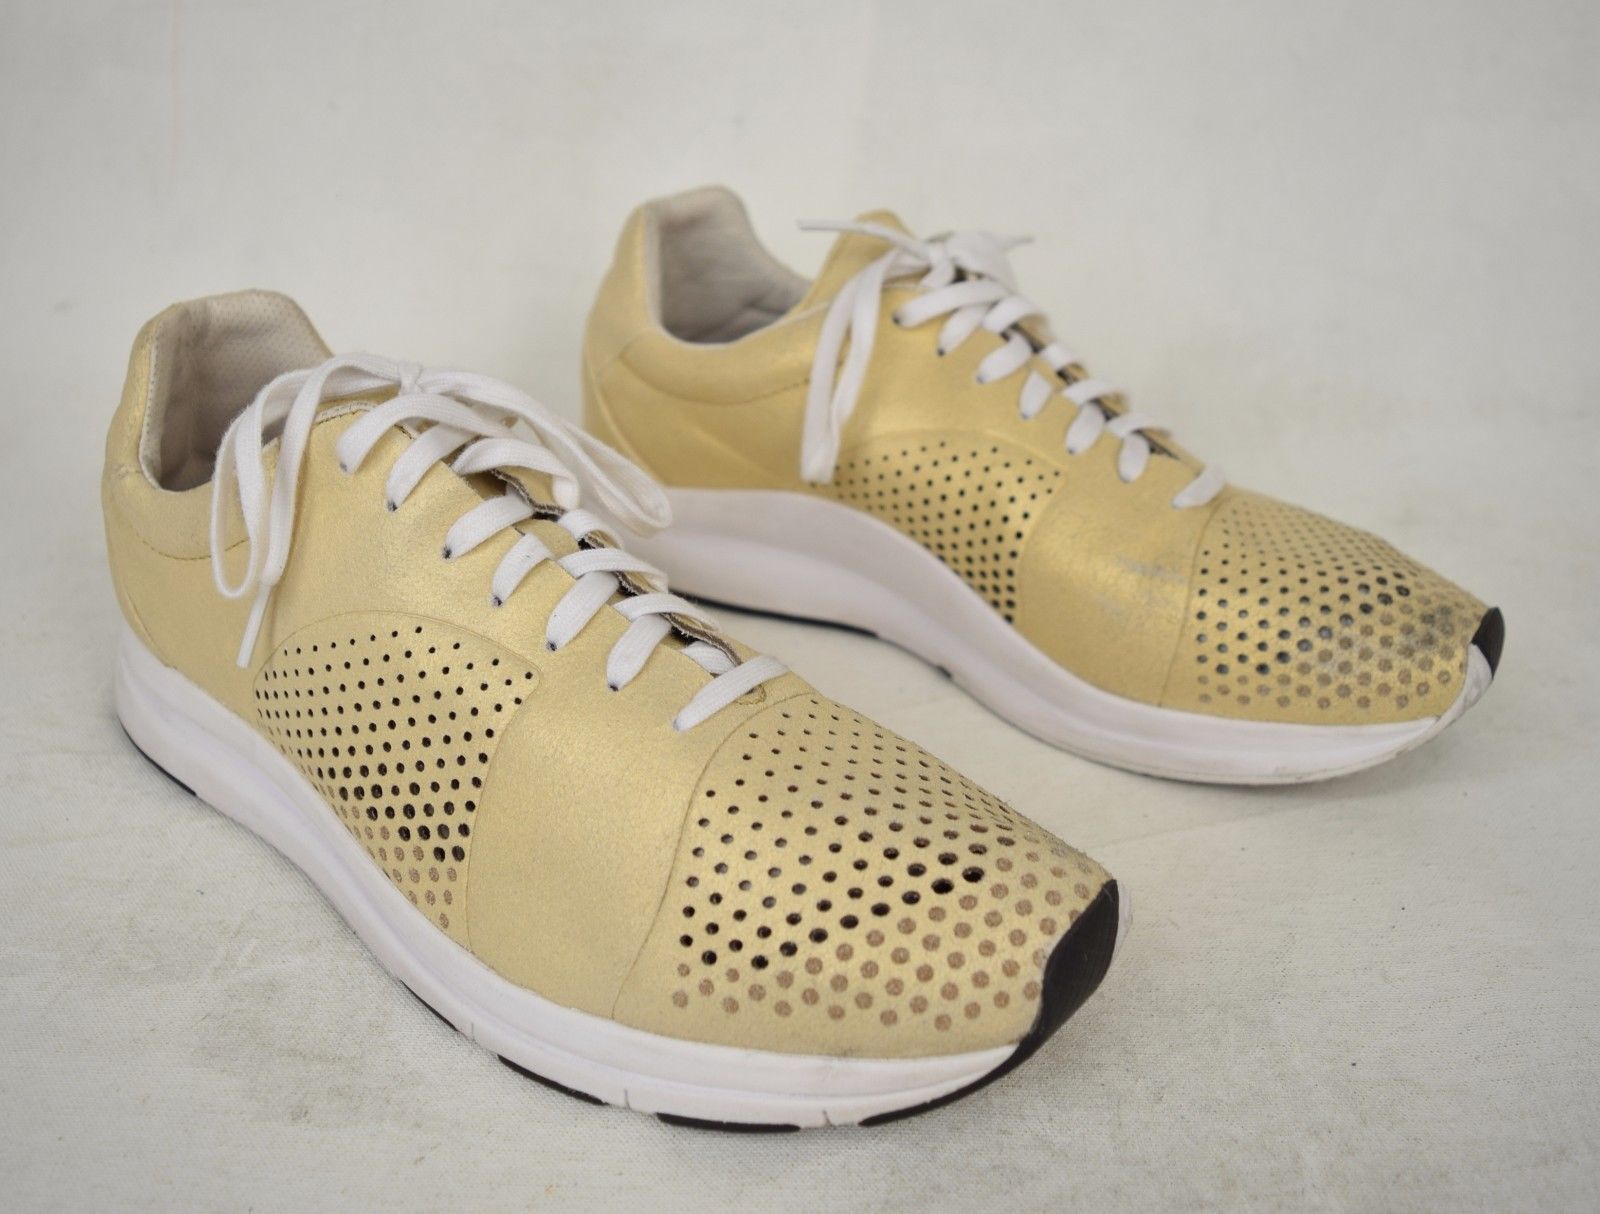 Primary image for Puma Hussein Chalayan Shoes Haast Gold Perforated Sneakers 10 Mens 353122 01